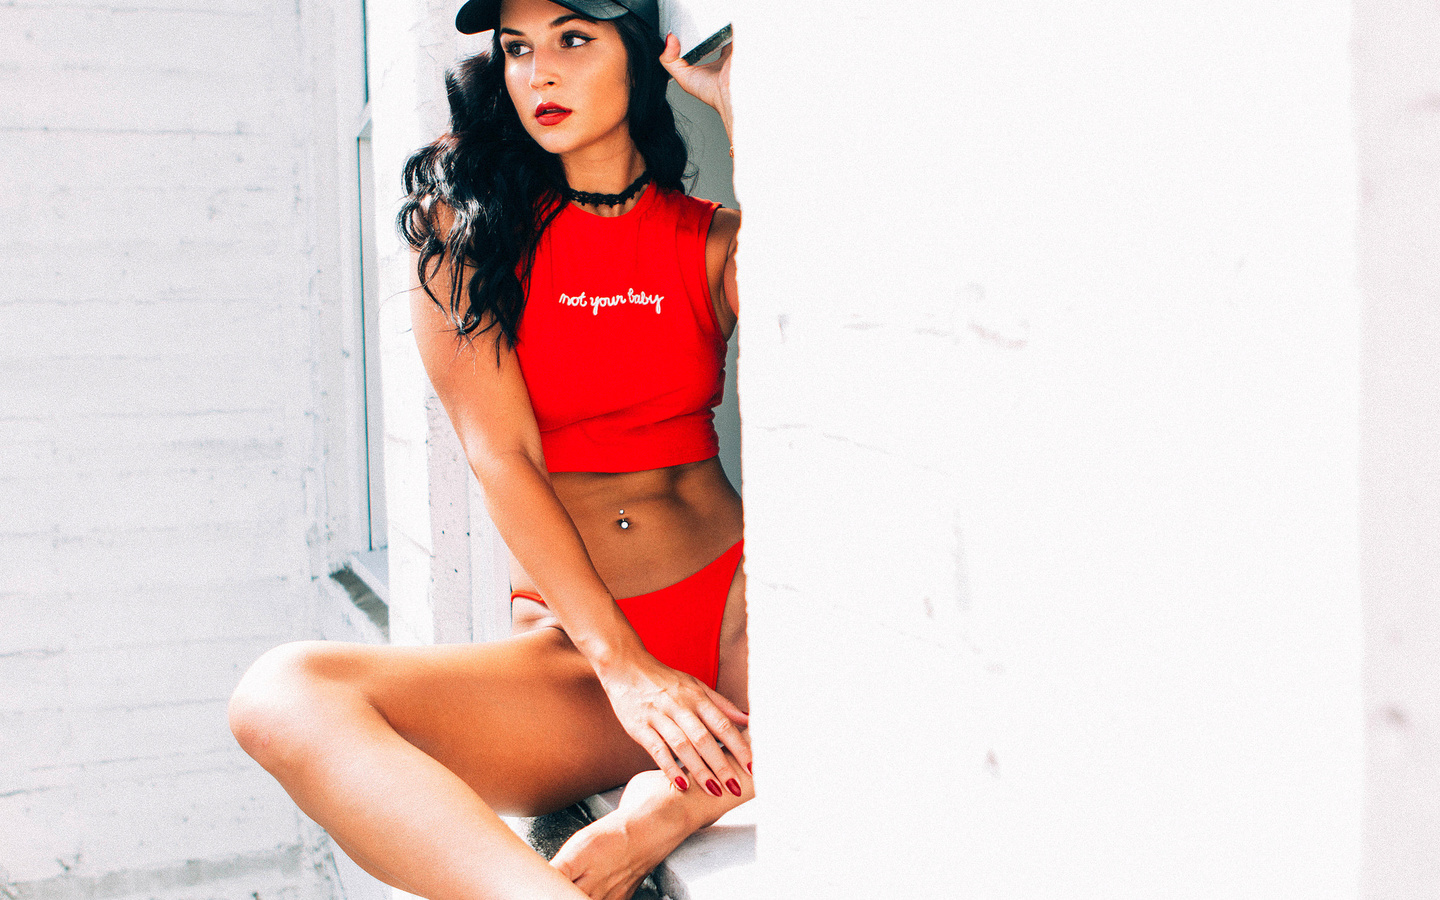 women, tanned, red panties, belly, t-shirt, baseball caps, pierced navel, red nails, choker, sitting, red lipstick